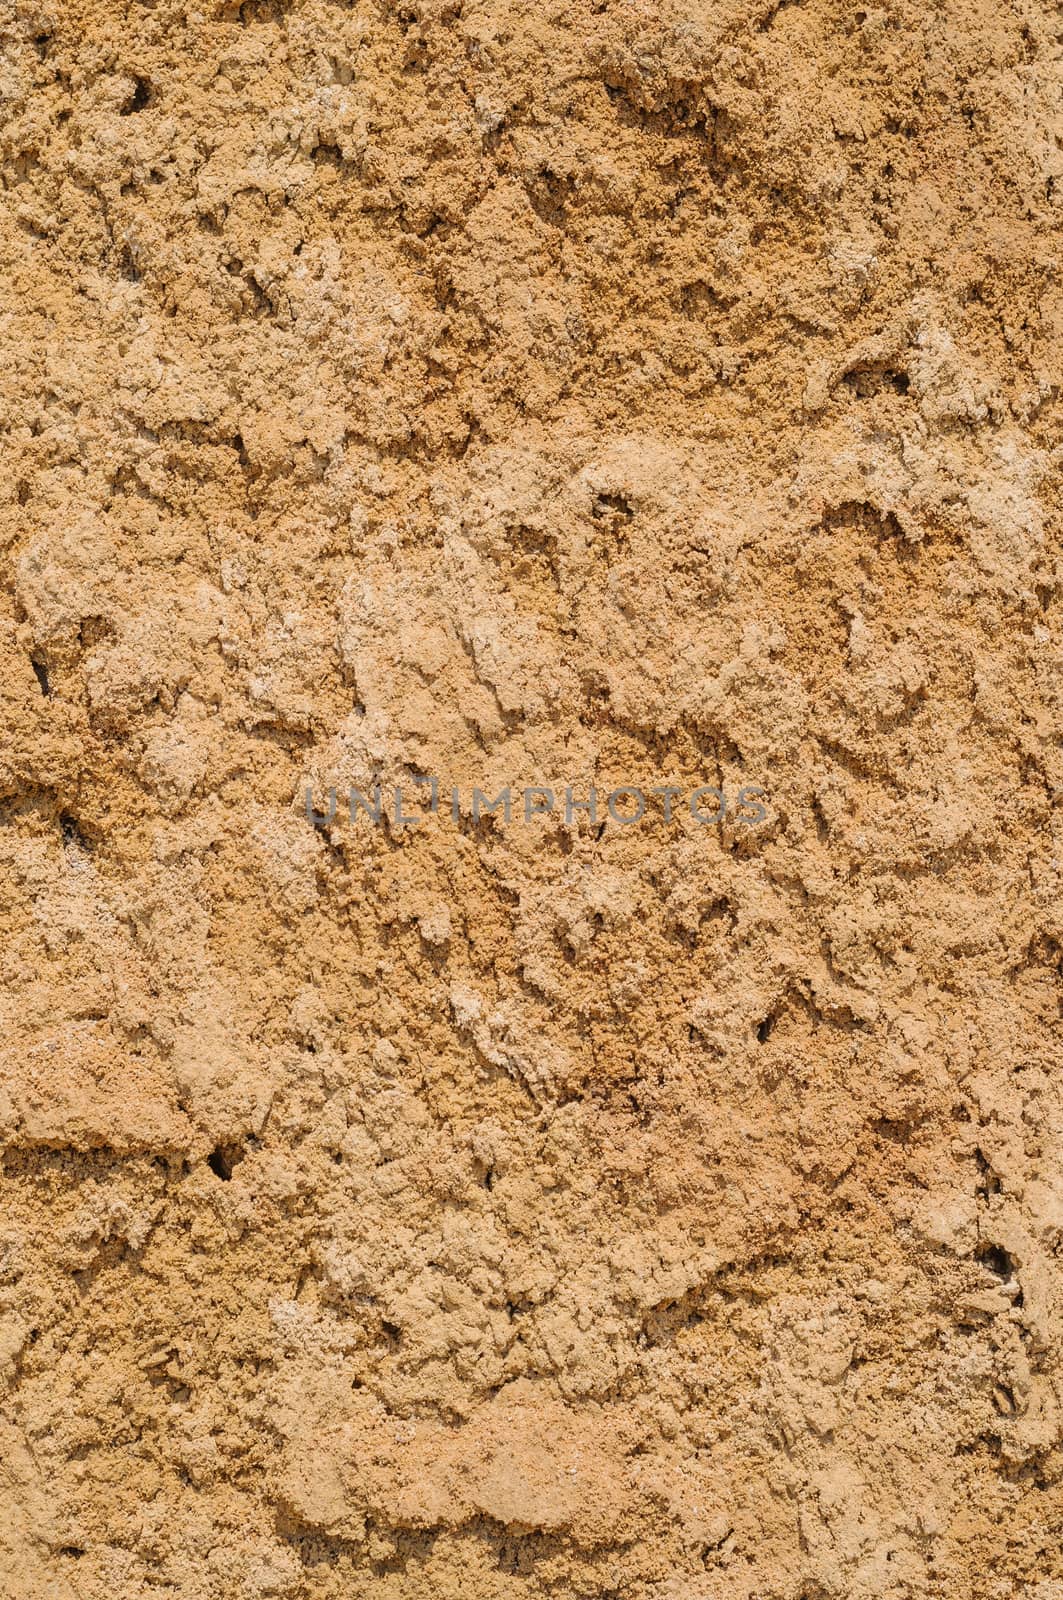 Yellow clay soil texture background, dried cracked surface